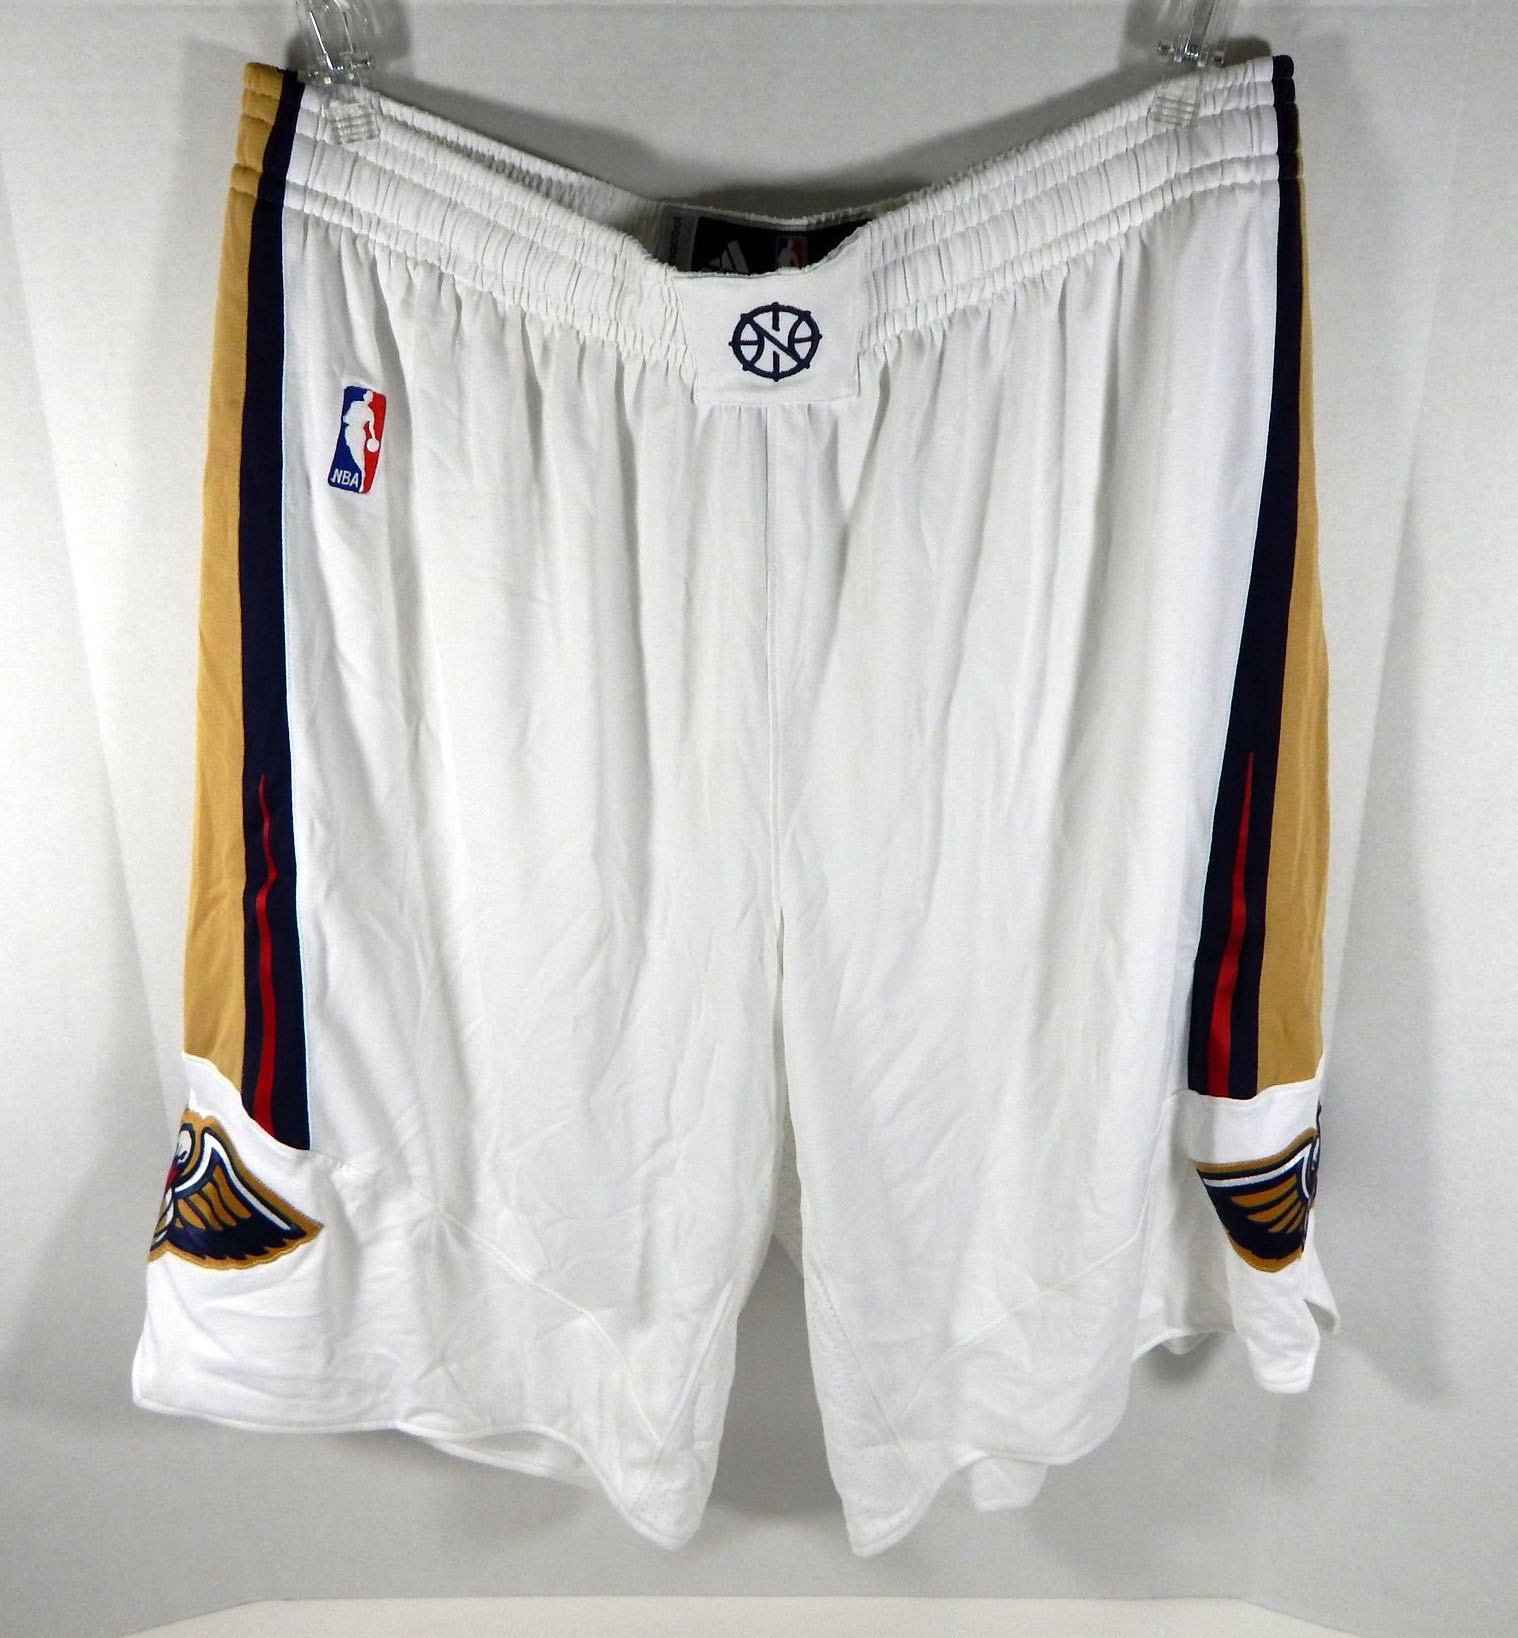 2013-14 New Orleans Pelicans Game Issued White Shorts 4XL4 710804S | eBay